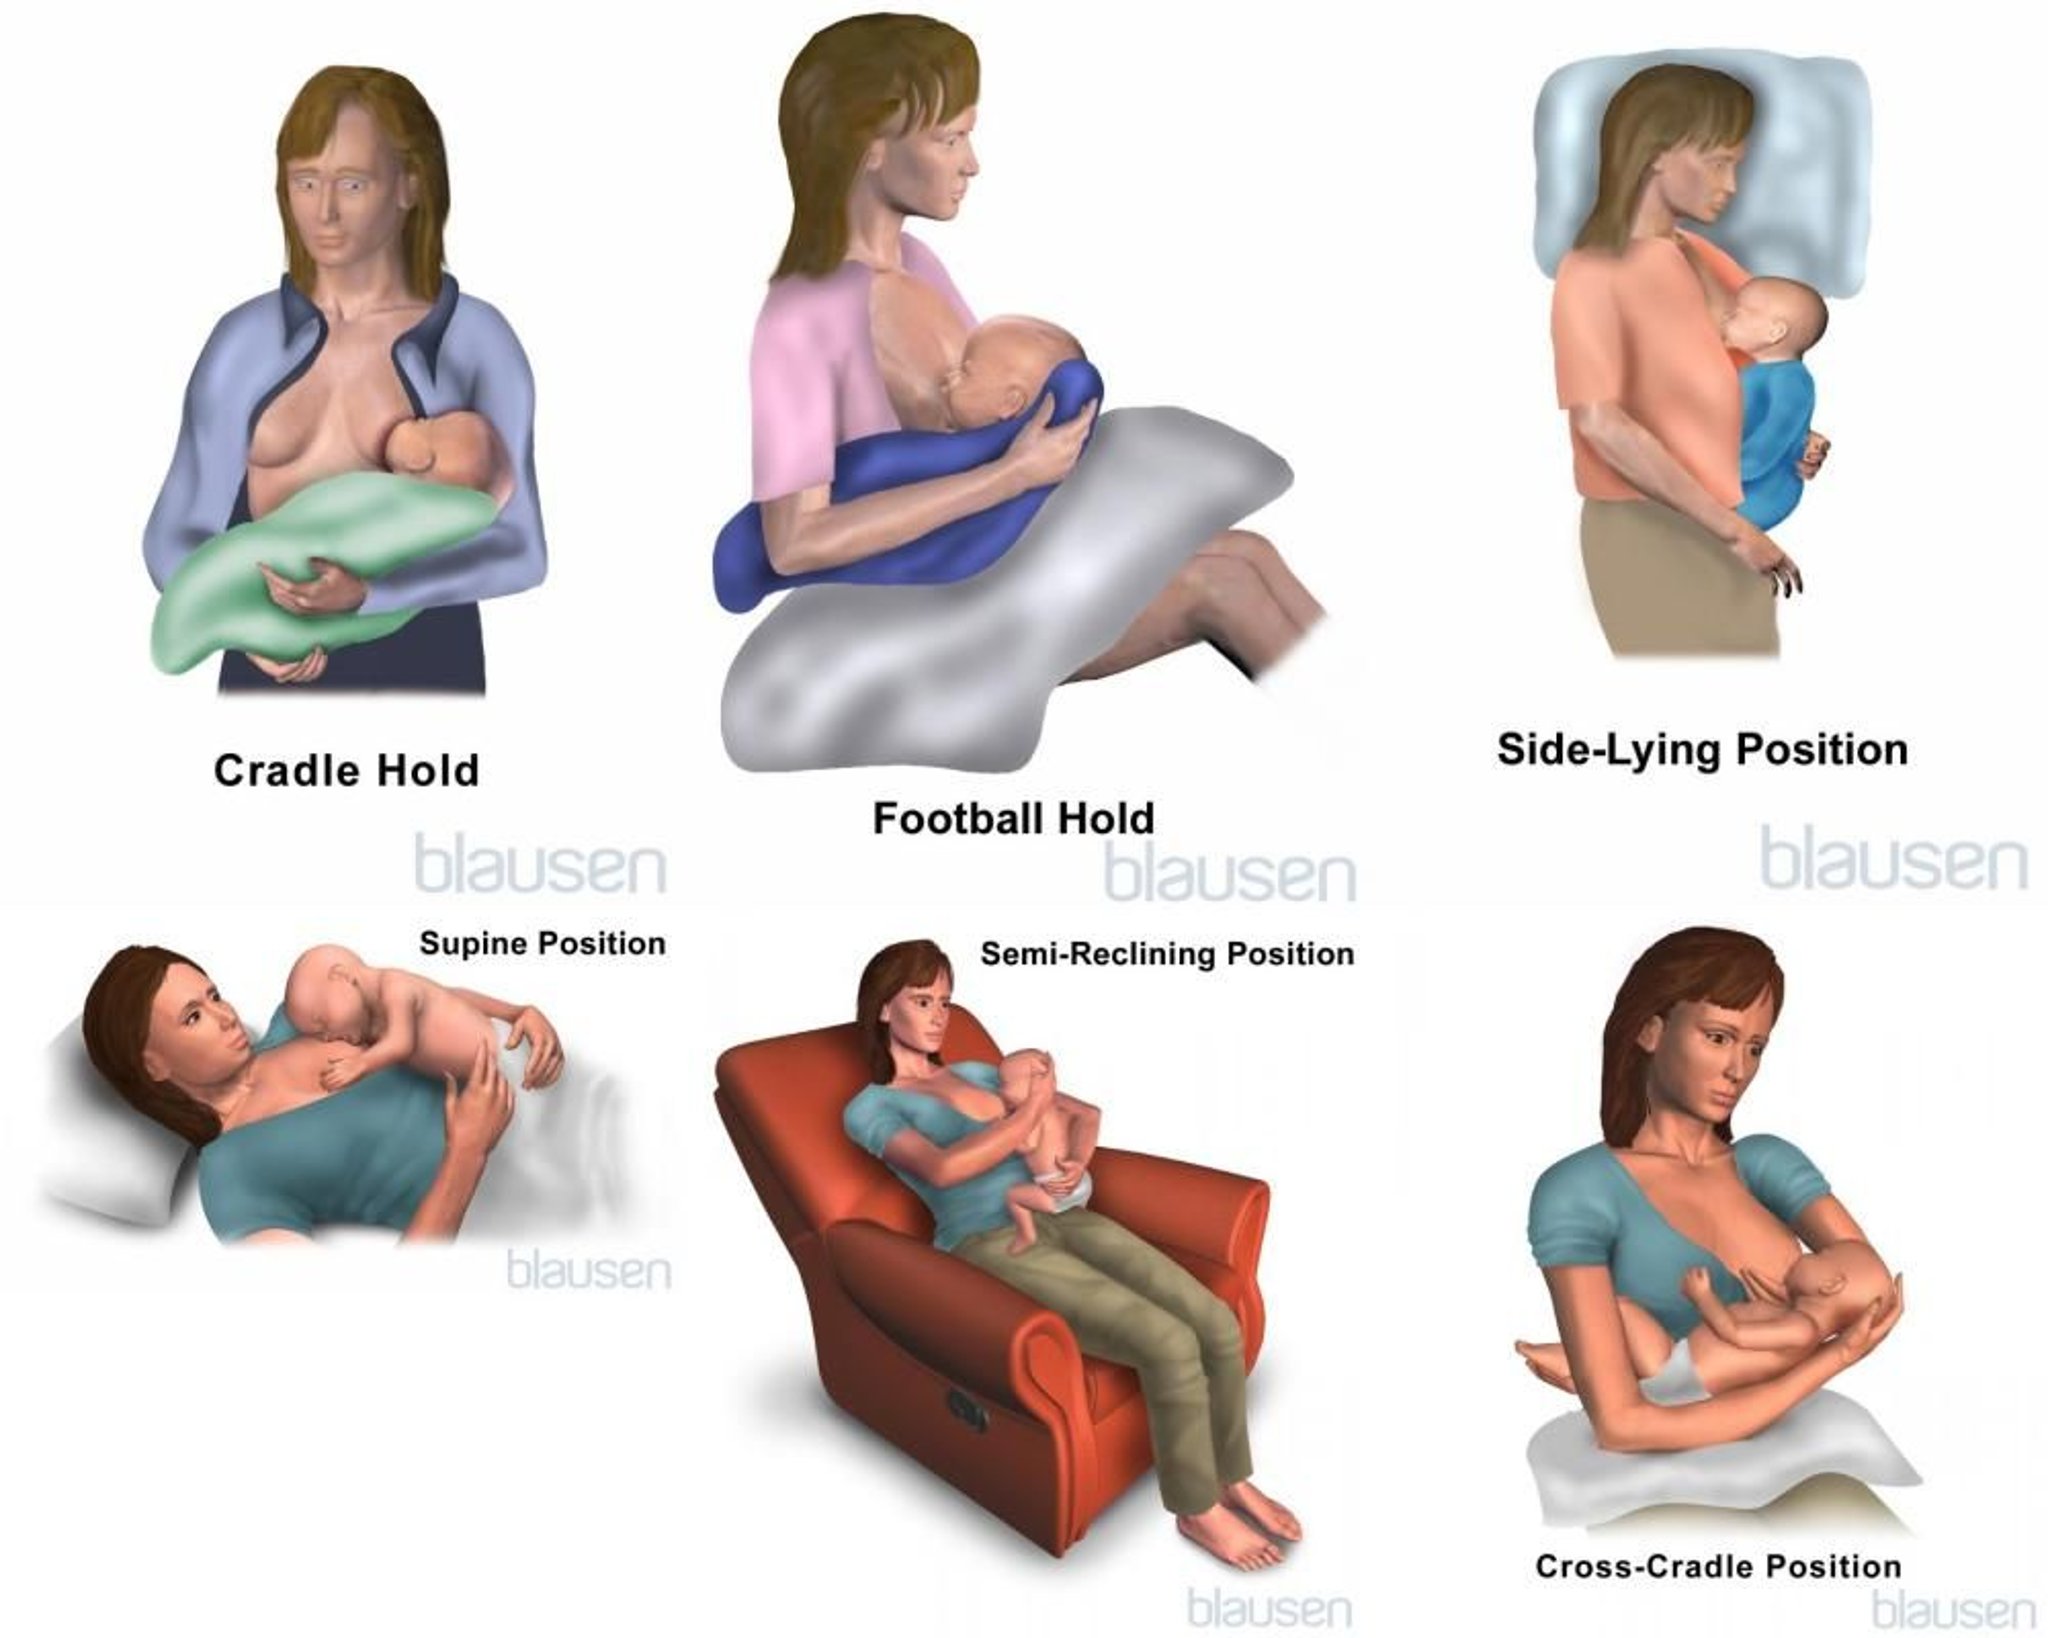 Some Additional Positions for Breastfeeding